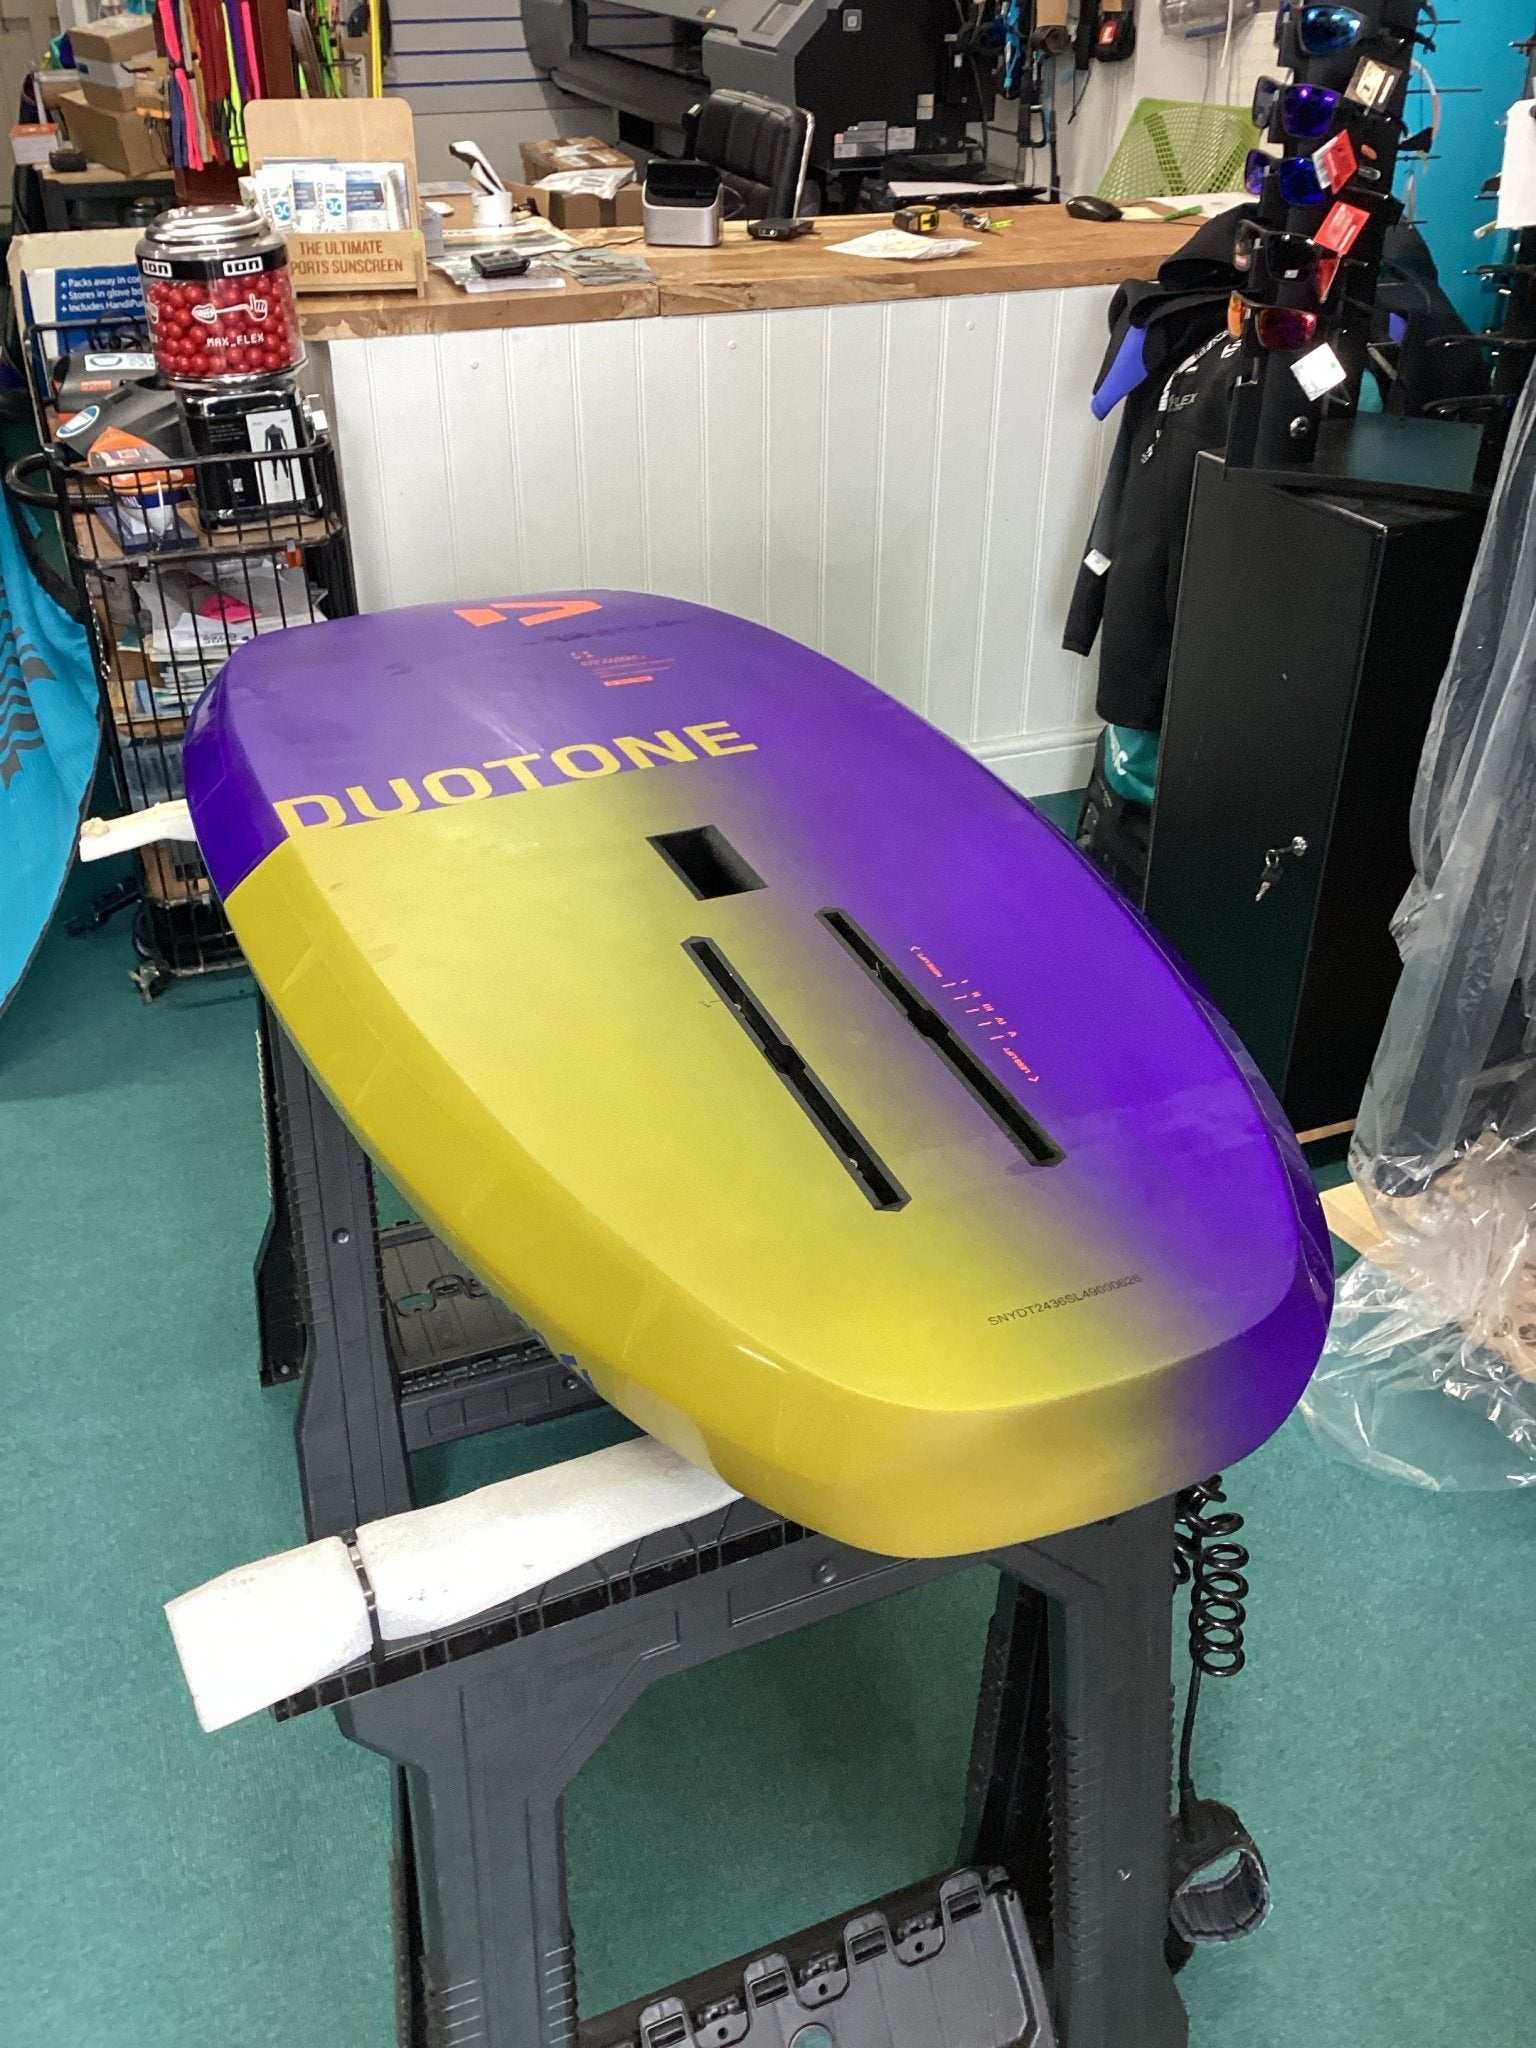 USED Duotone Sky Style SLS 2023 65 Litre Foil Board - Worthing Watersports - Windsurfing Boards - Duotone X